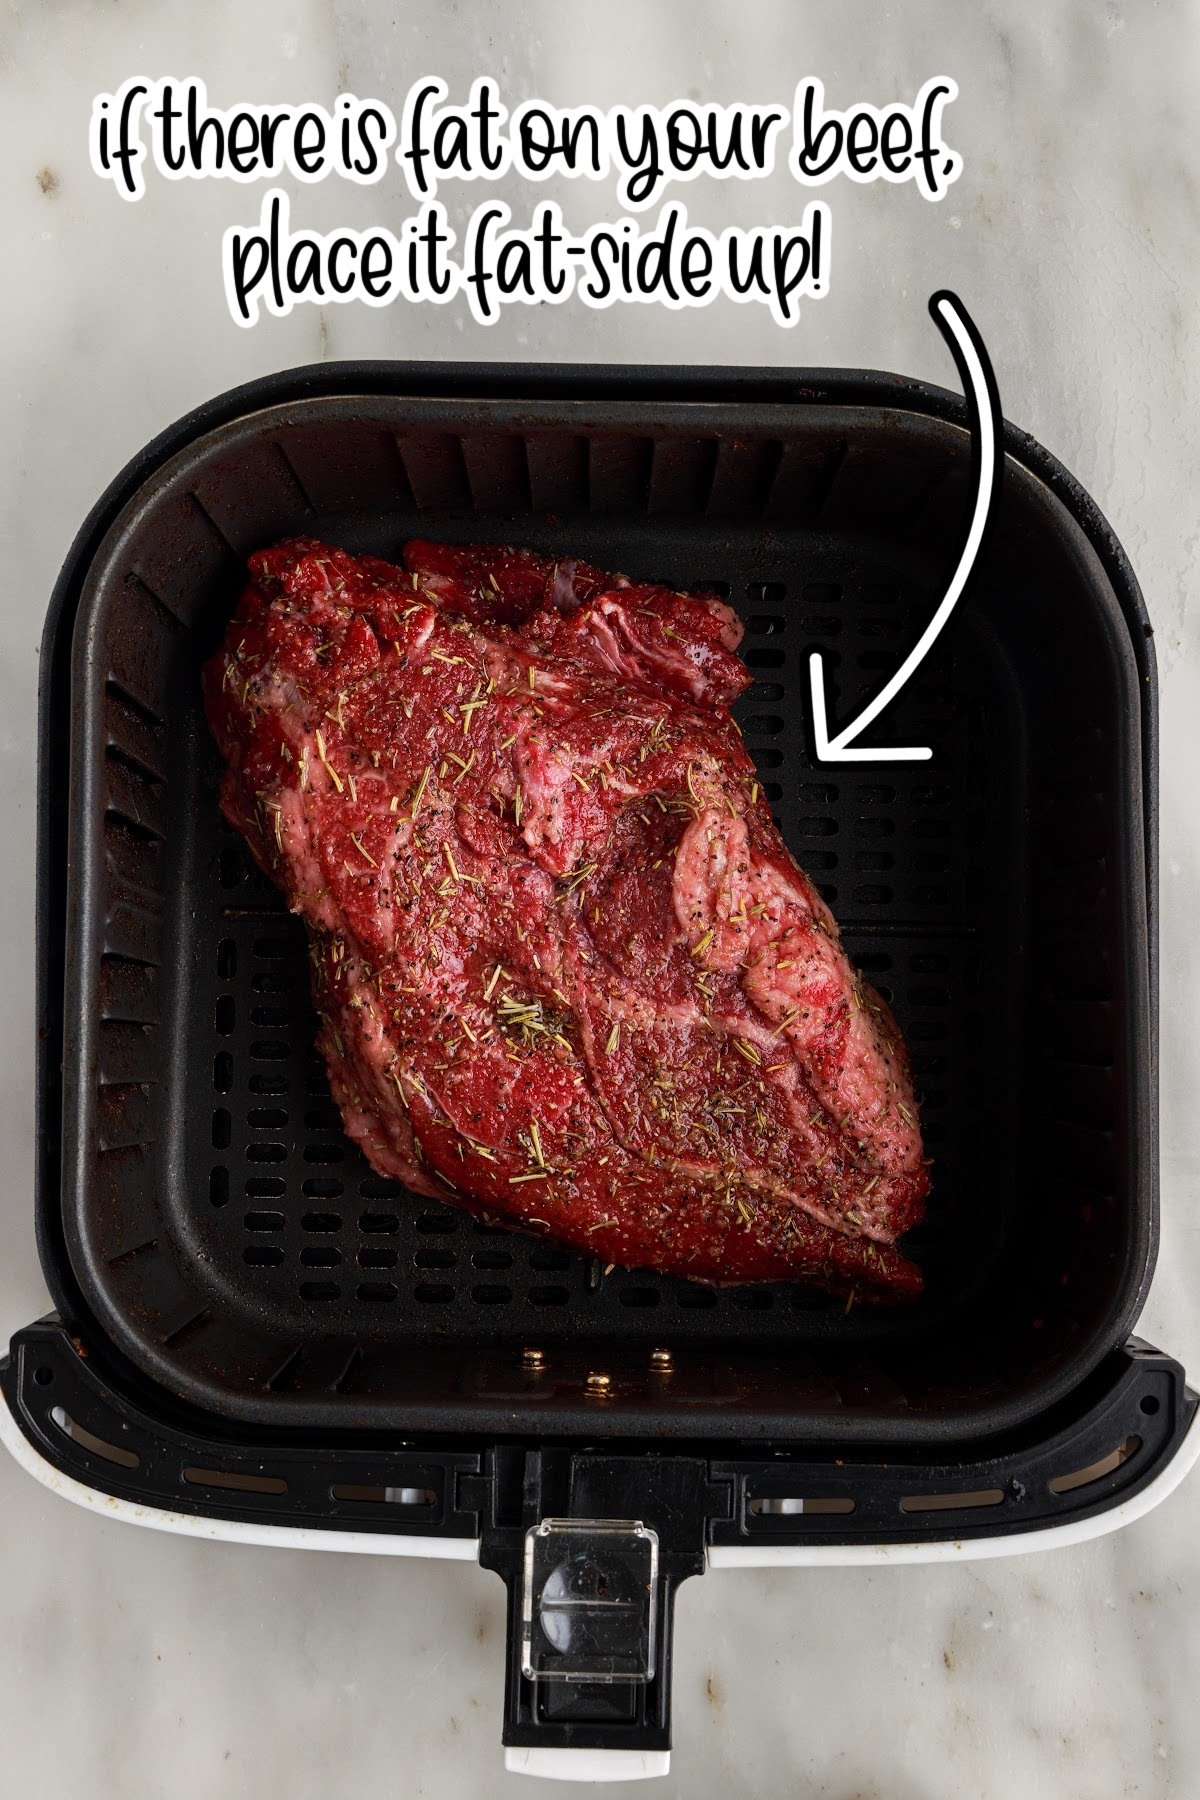 Air Fryer Roast Beef in an air fryer with text overlay.